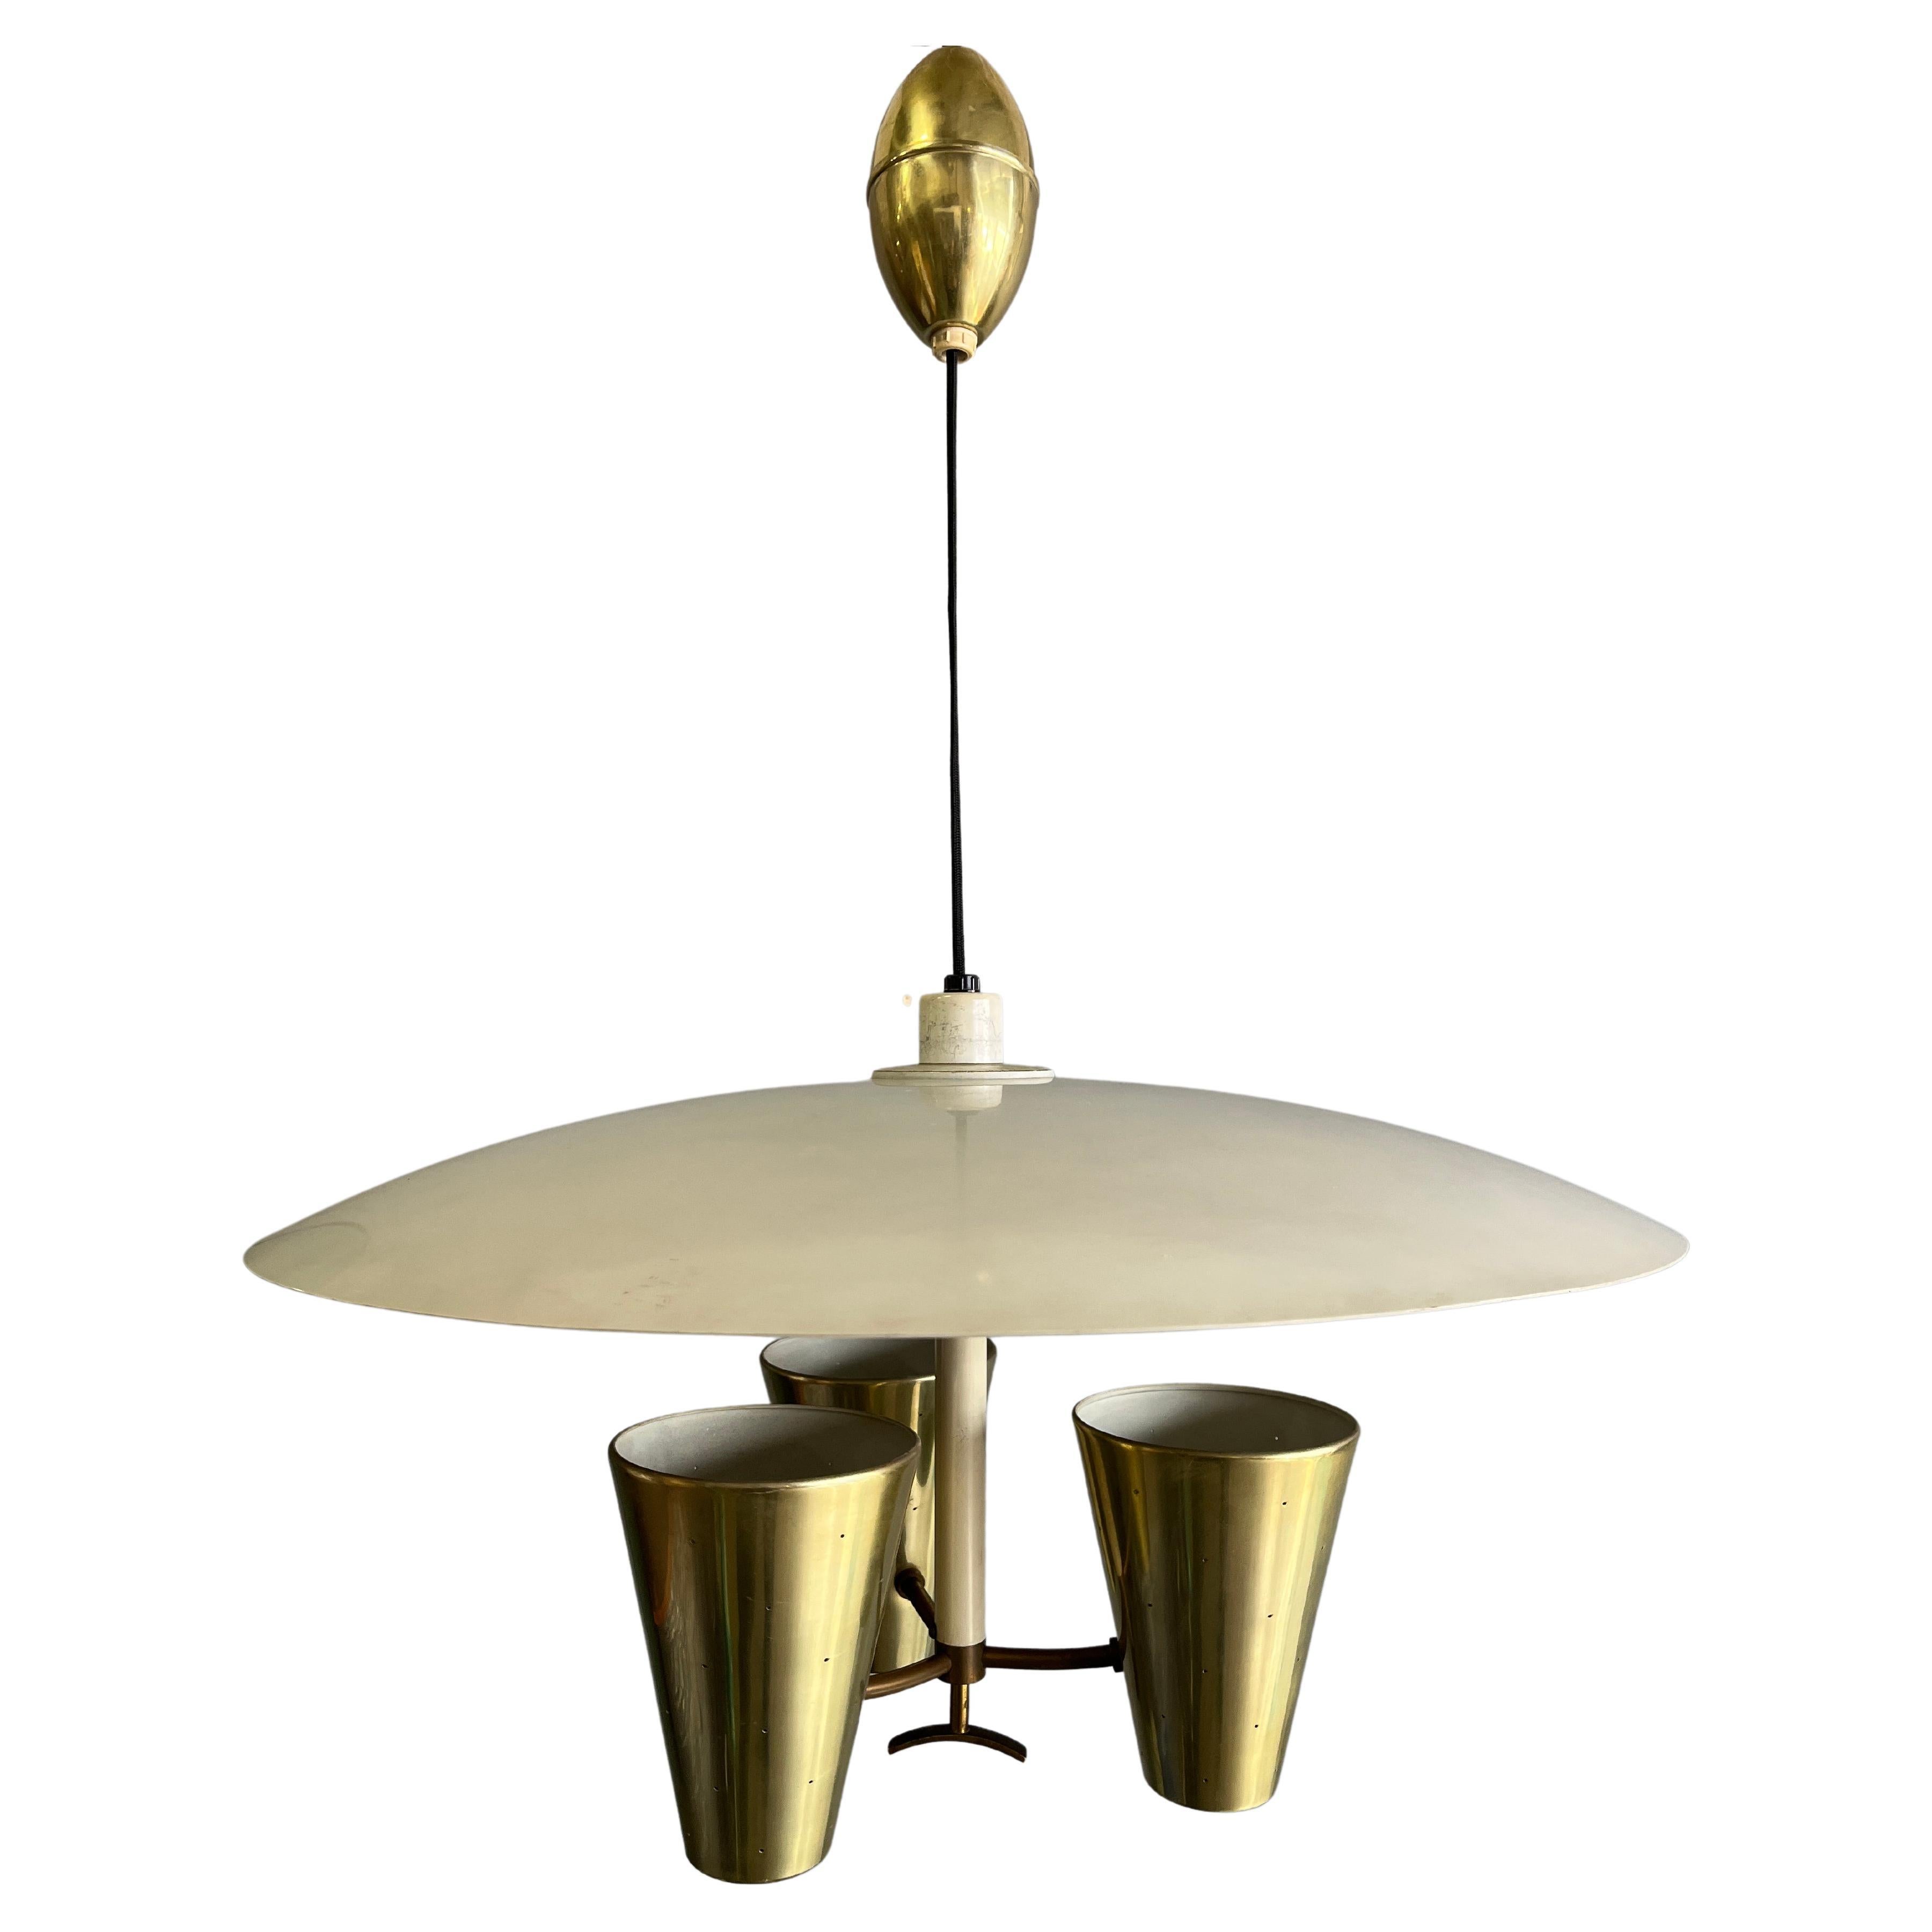 20th Century Saucer Pendant Light by Edward Wormley for Lightolier For Sale